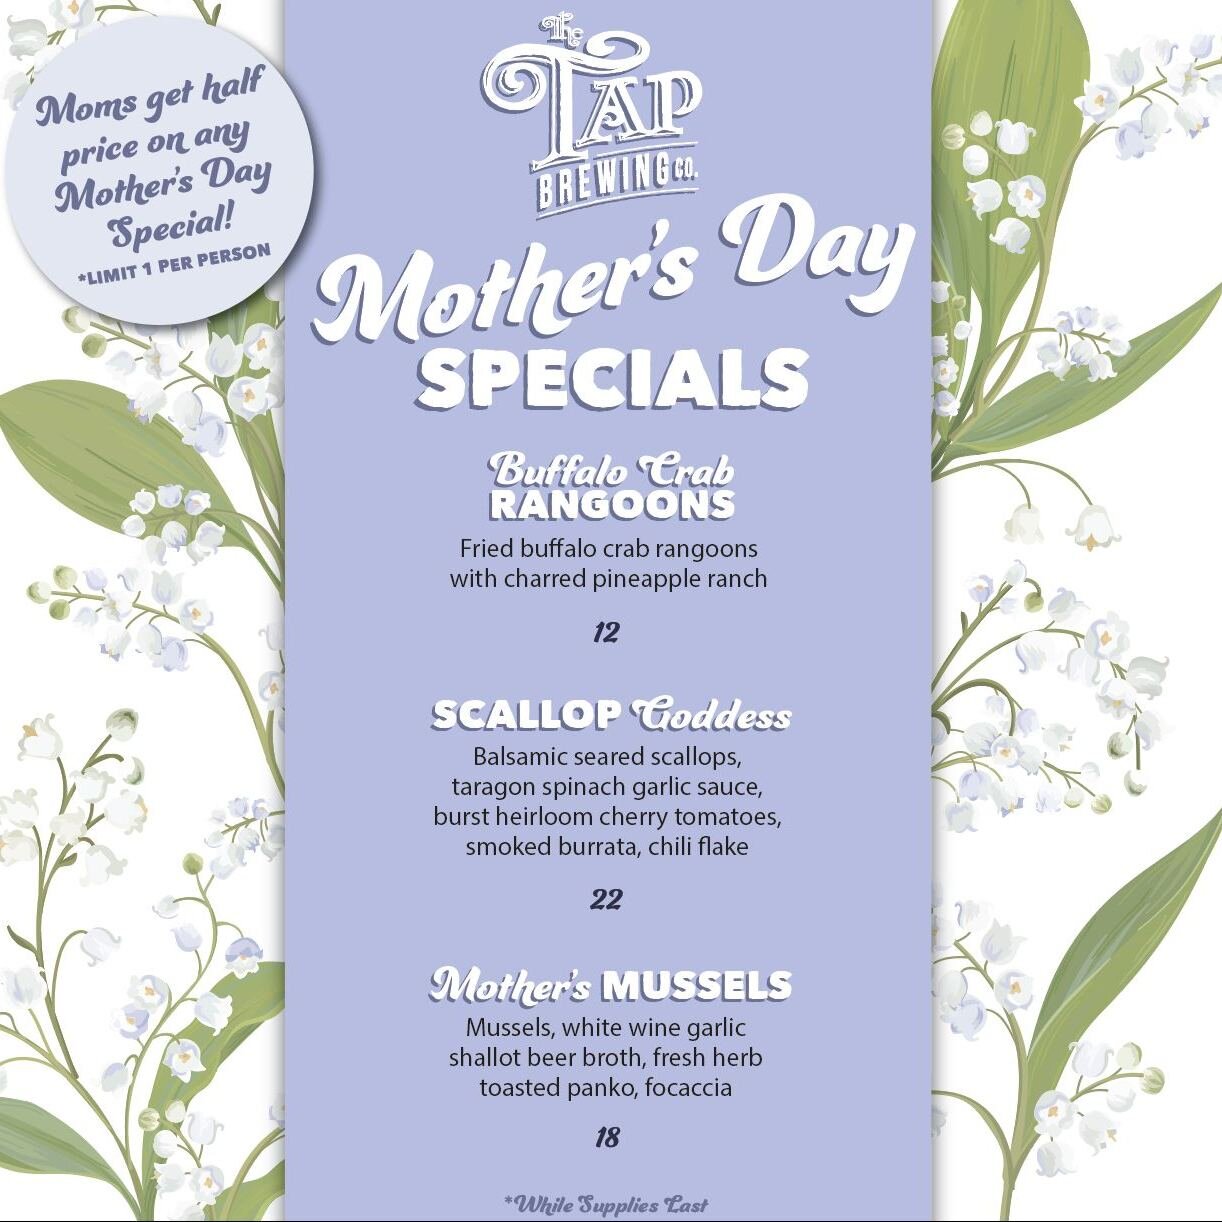 Show your mom or mother-like figure how much you love them with one of our tasty Mother's Day Specials this weekend! Moms get half off any Mother's Day specials Saturday &amp; Sunday.

#momlove #happymothersday #specials #halfoffformom #tapbrewingcom